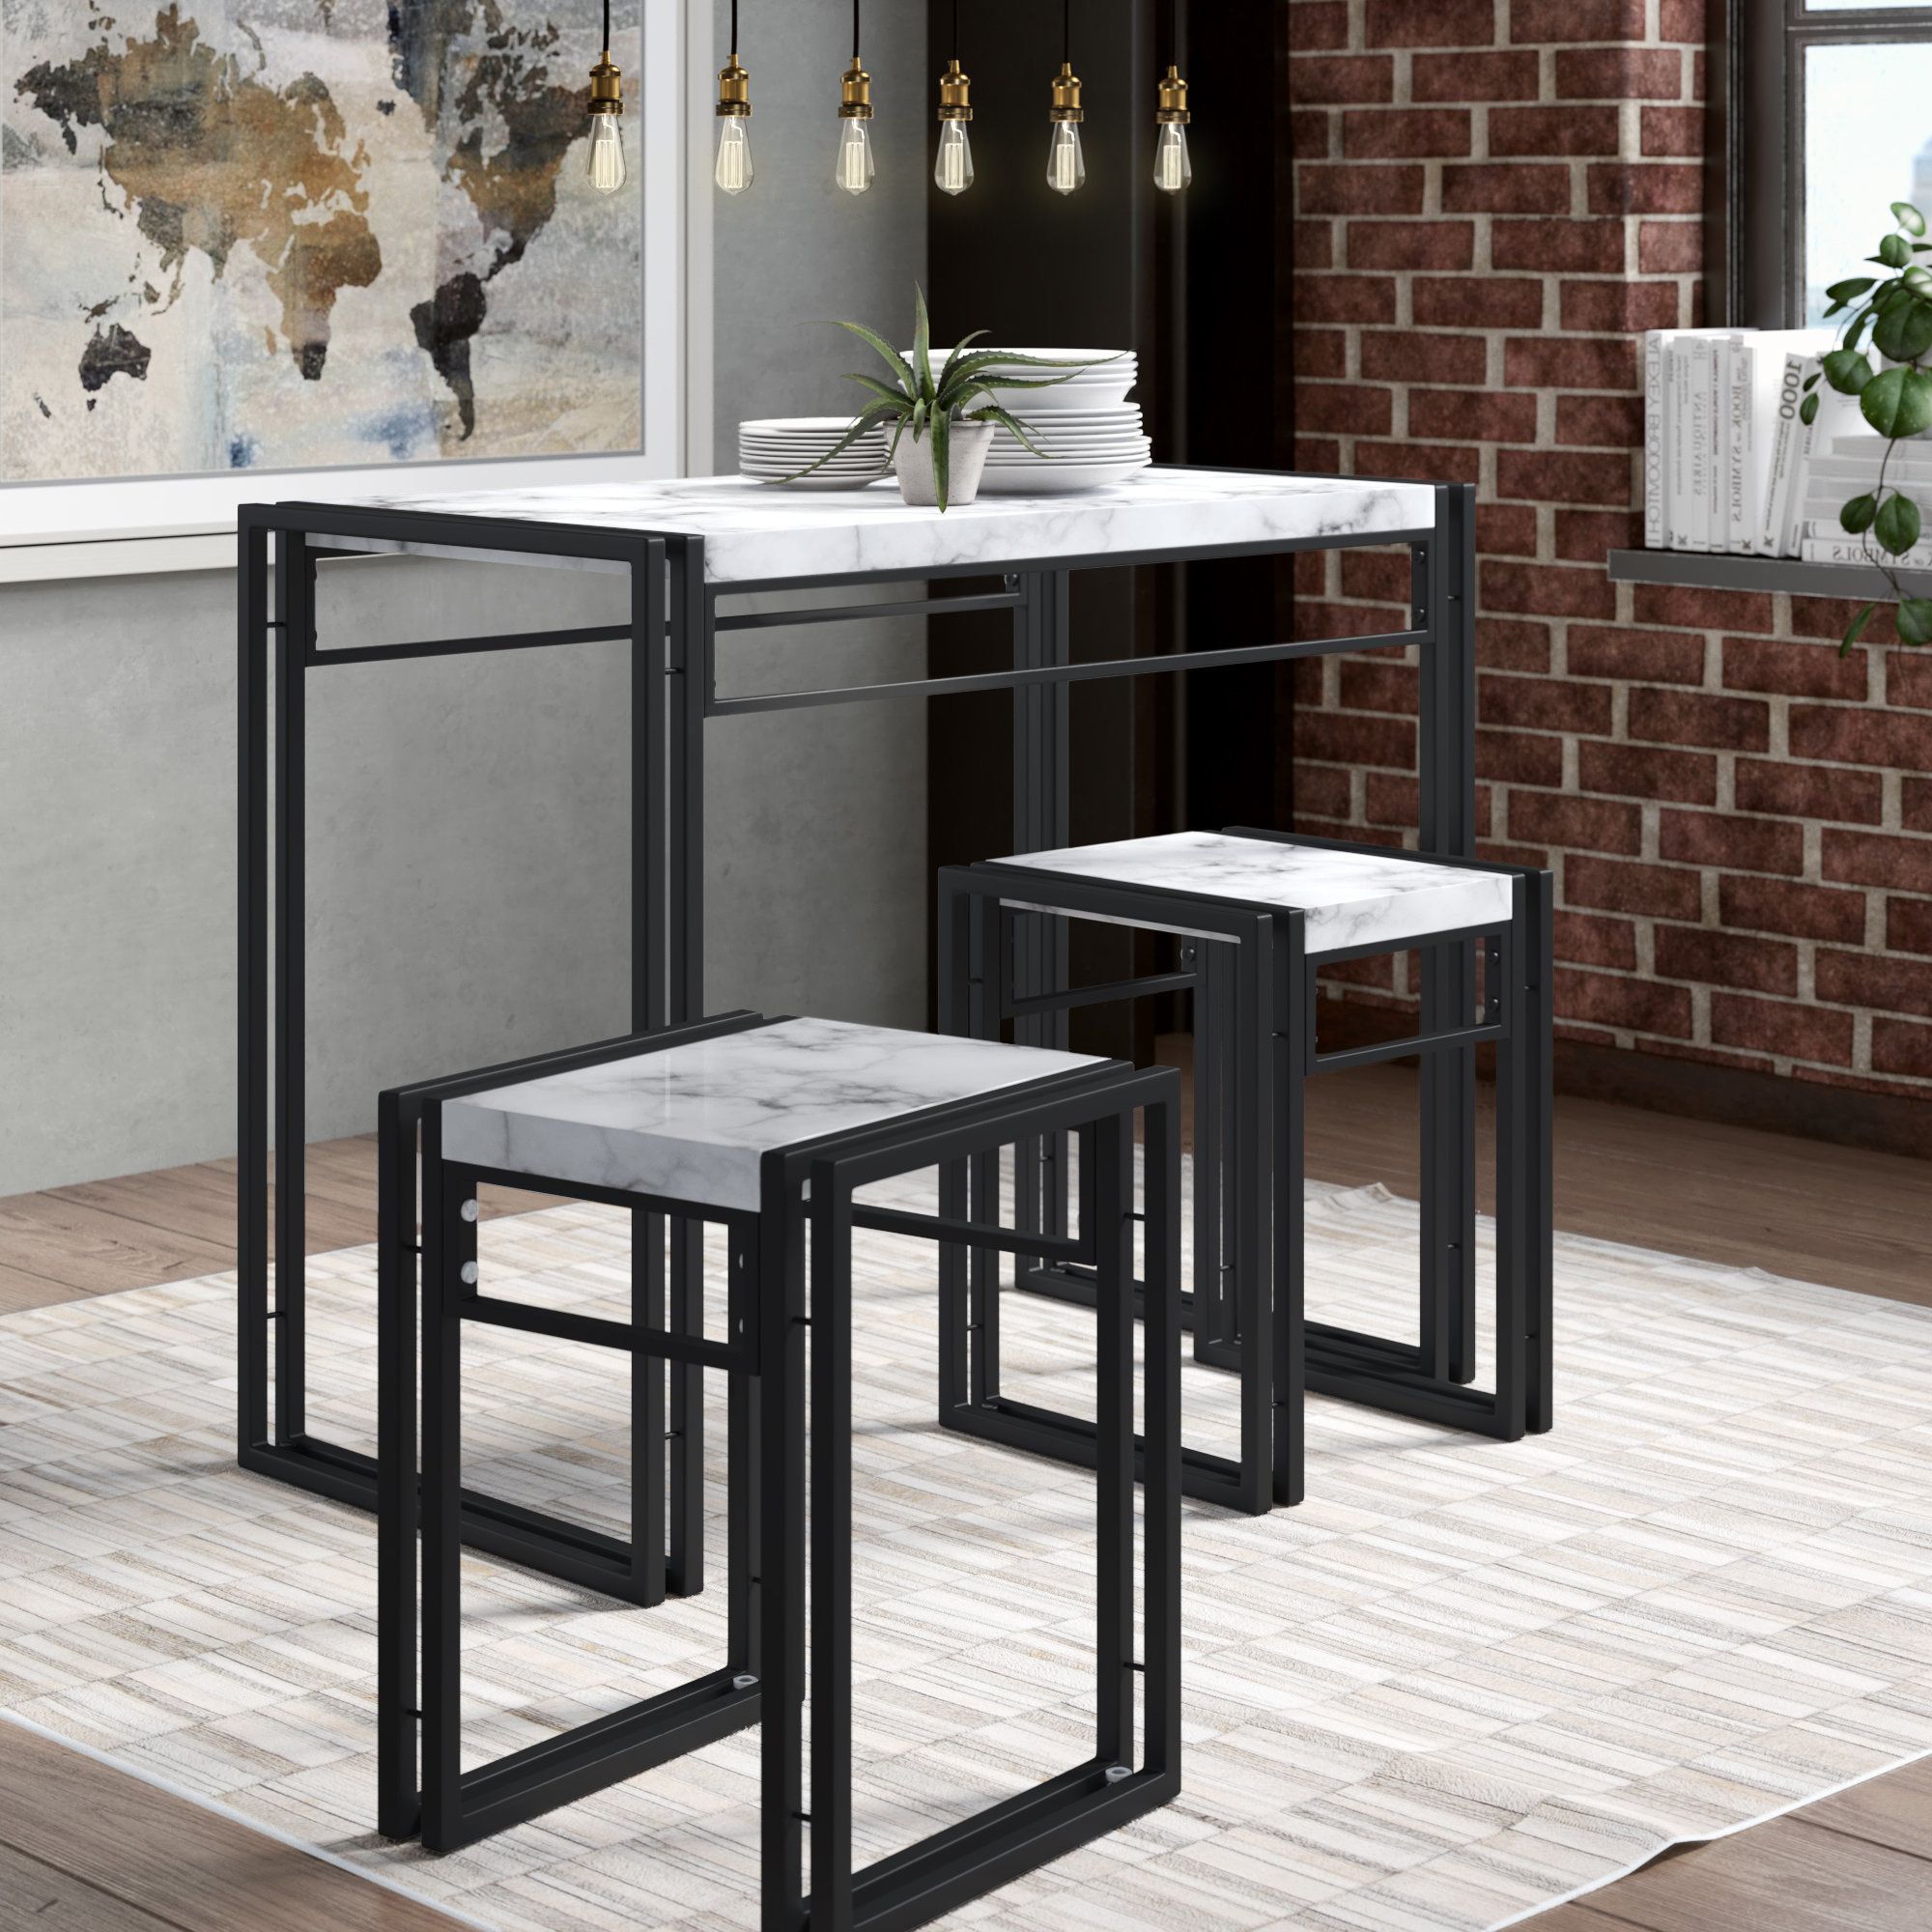 Debby Small Space 3 Piece Dining Sets Regarding Most Current Debby Small Space 3 Piece Dining Set (Photo 1 of 20)